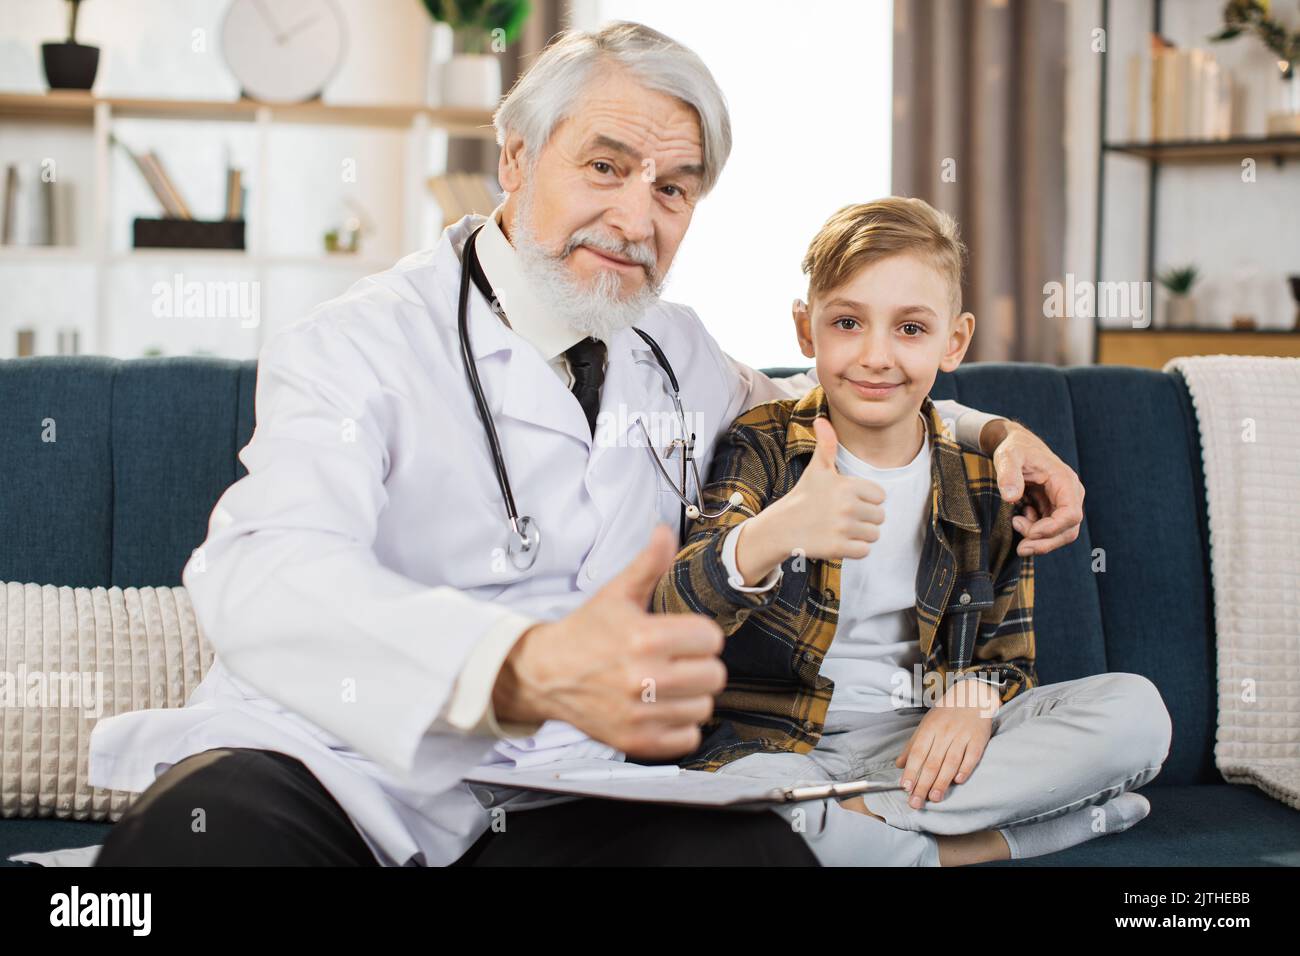 Mature man doctor in white coat and stethoscope on shoulders talking to sick boy patient, sitting on sofa, showing treatment plan, medication list, lo Stock Photo